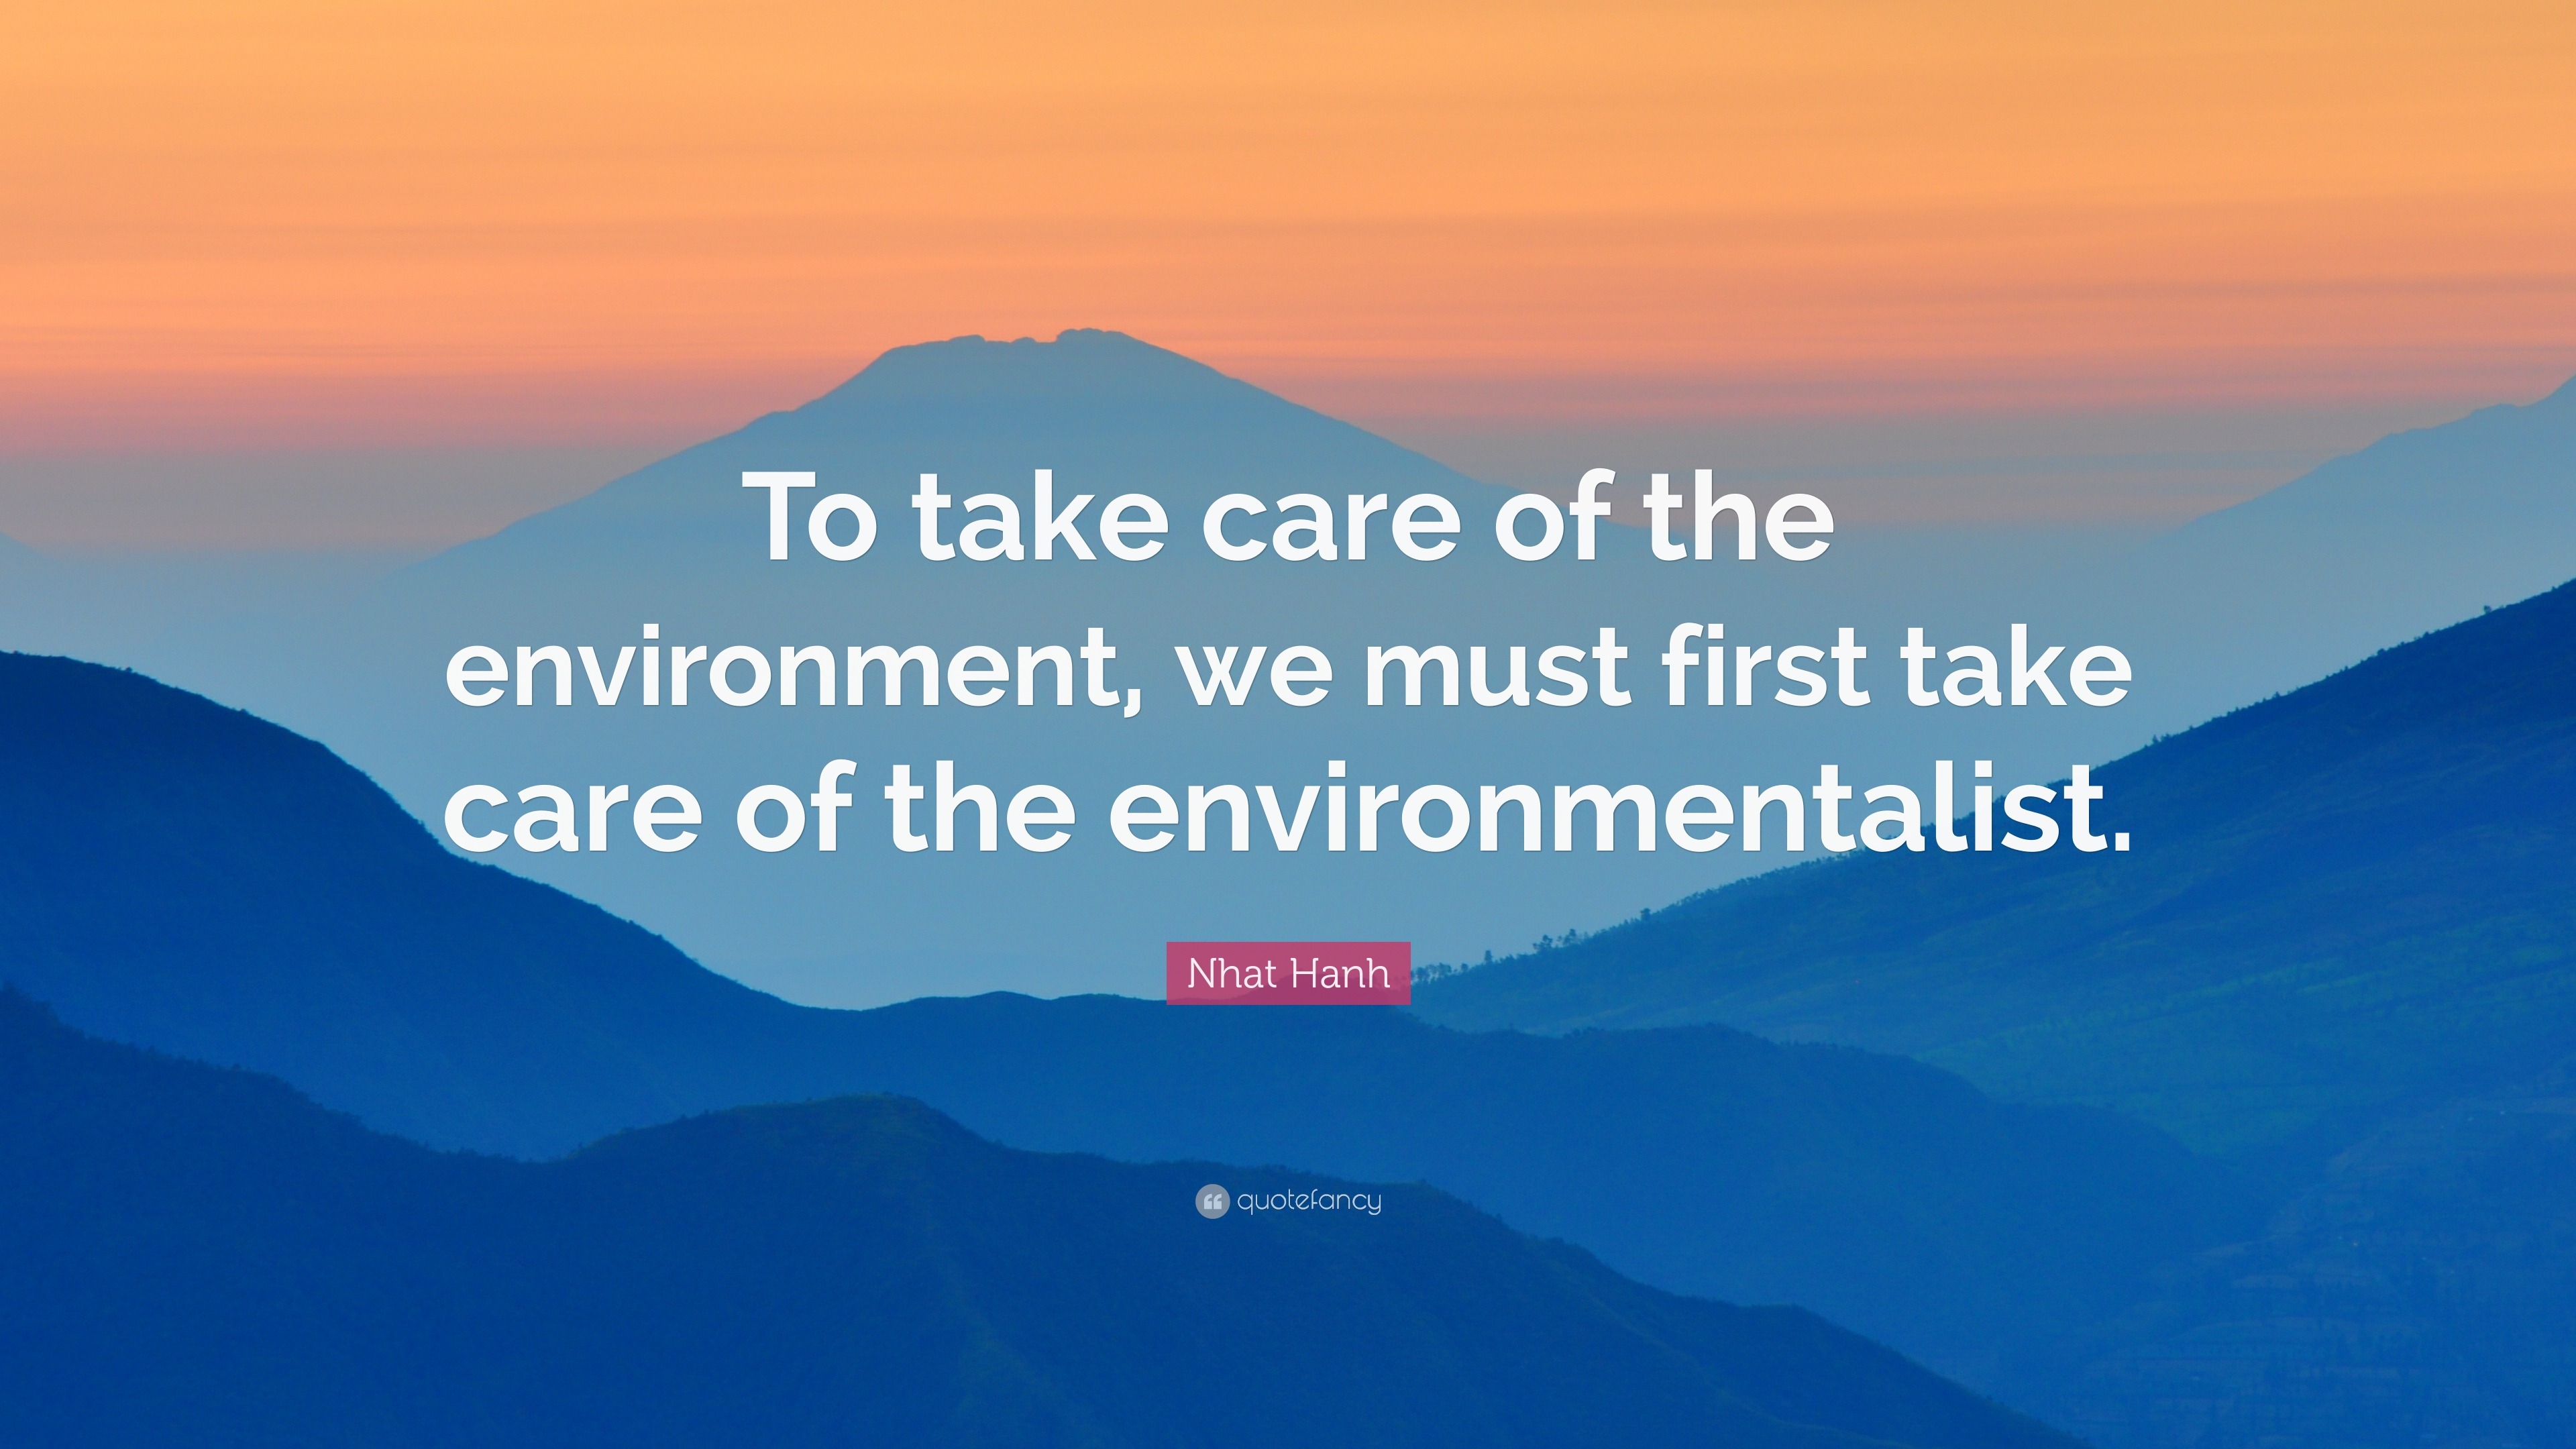 Nhat Hanh Quote: “To take care of the environment, we must first take